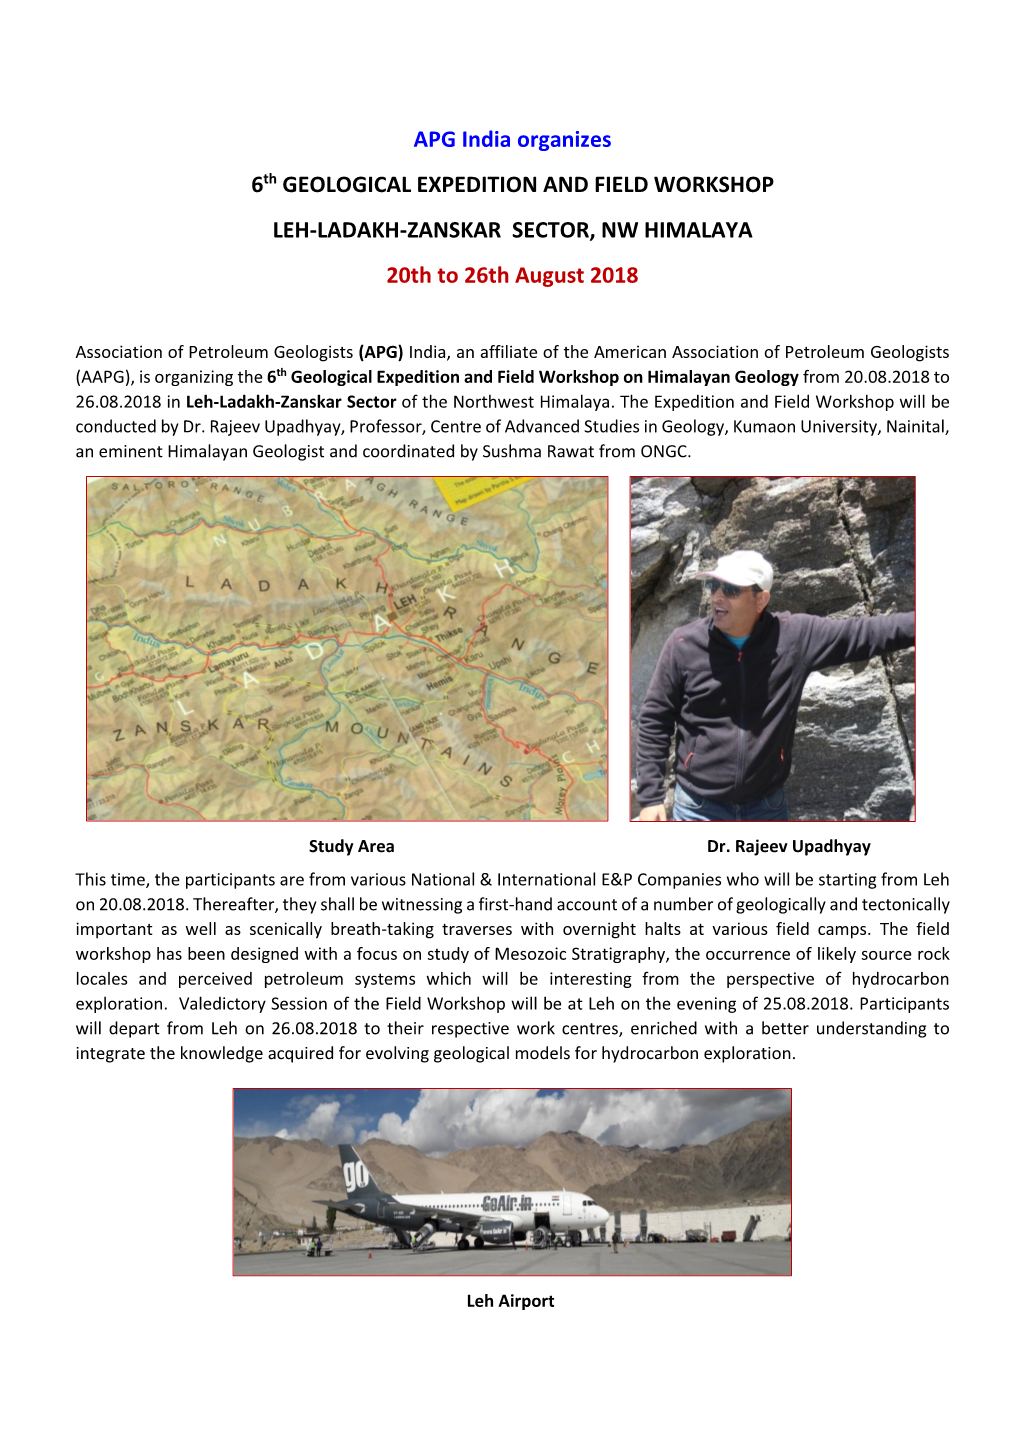 APG India Organizes 6Th GEOLOGICAL EXPEDITION and FIELD WORKSHOP LEH-LADAKH-ZANSKAR SECTOR, NW HIMALAYA 20Th to 26Th August 2018